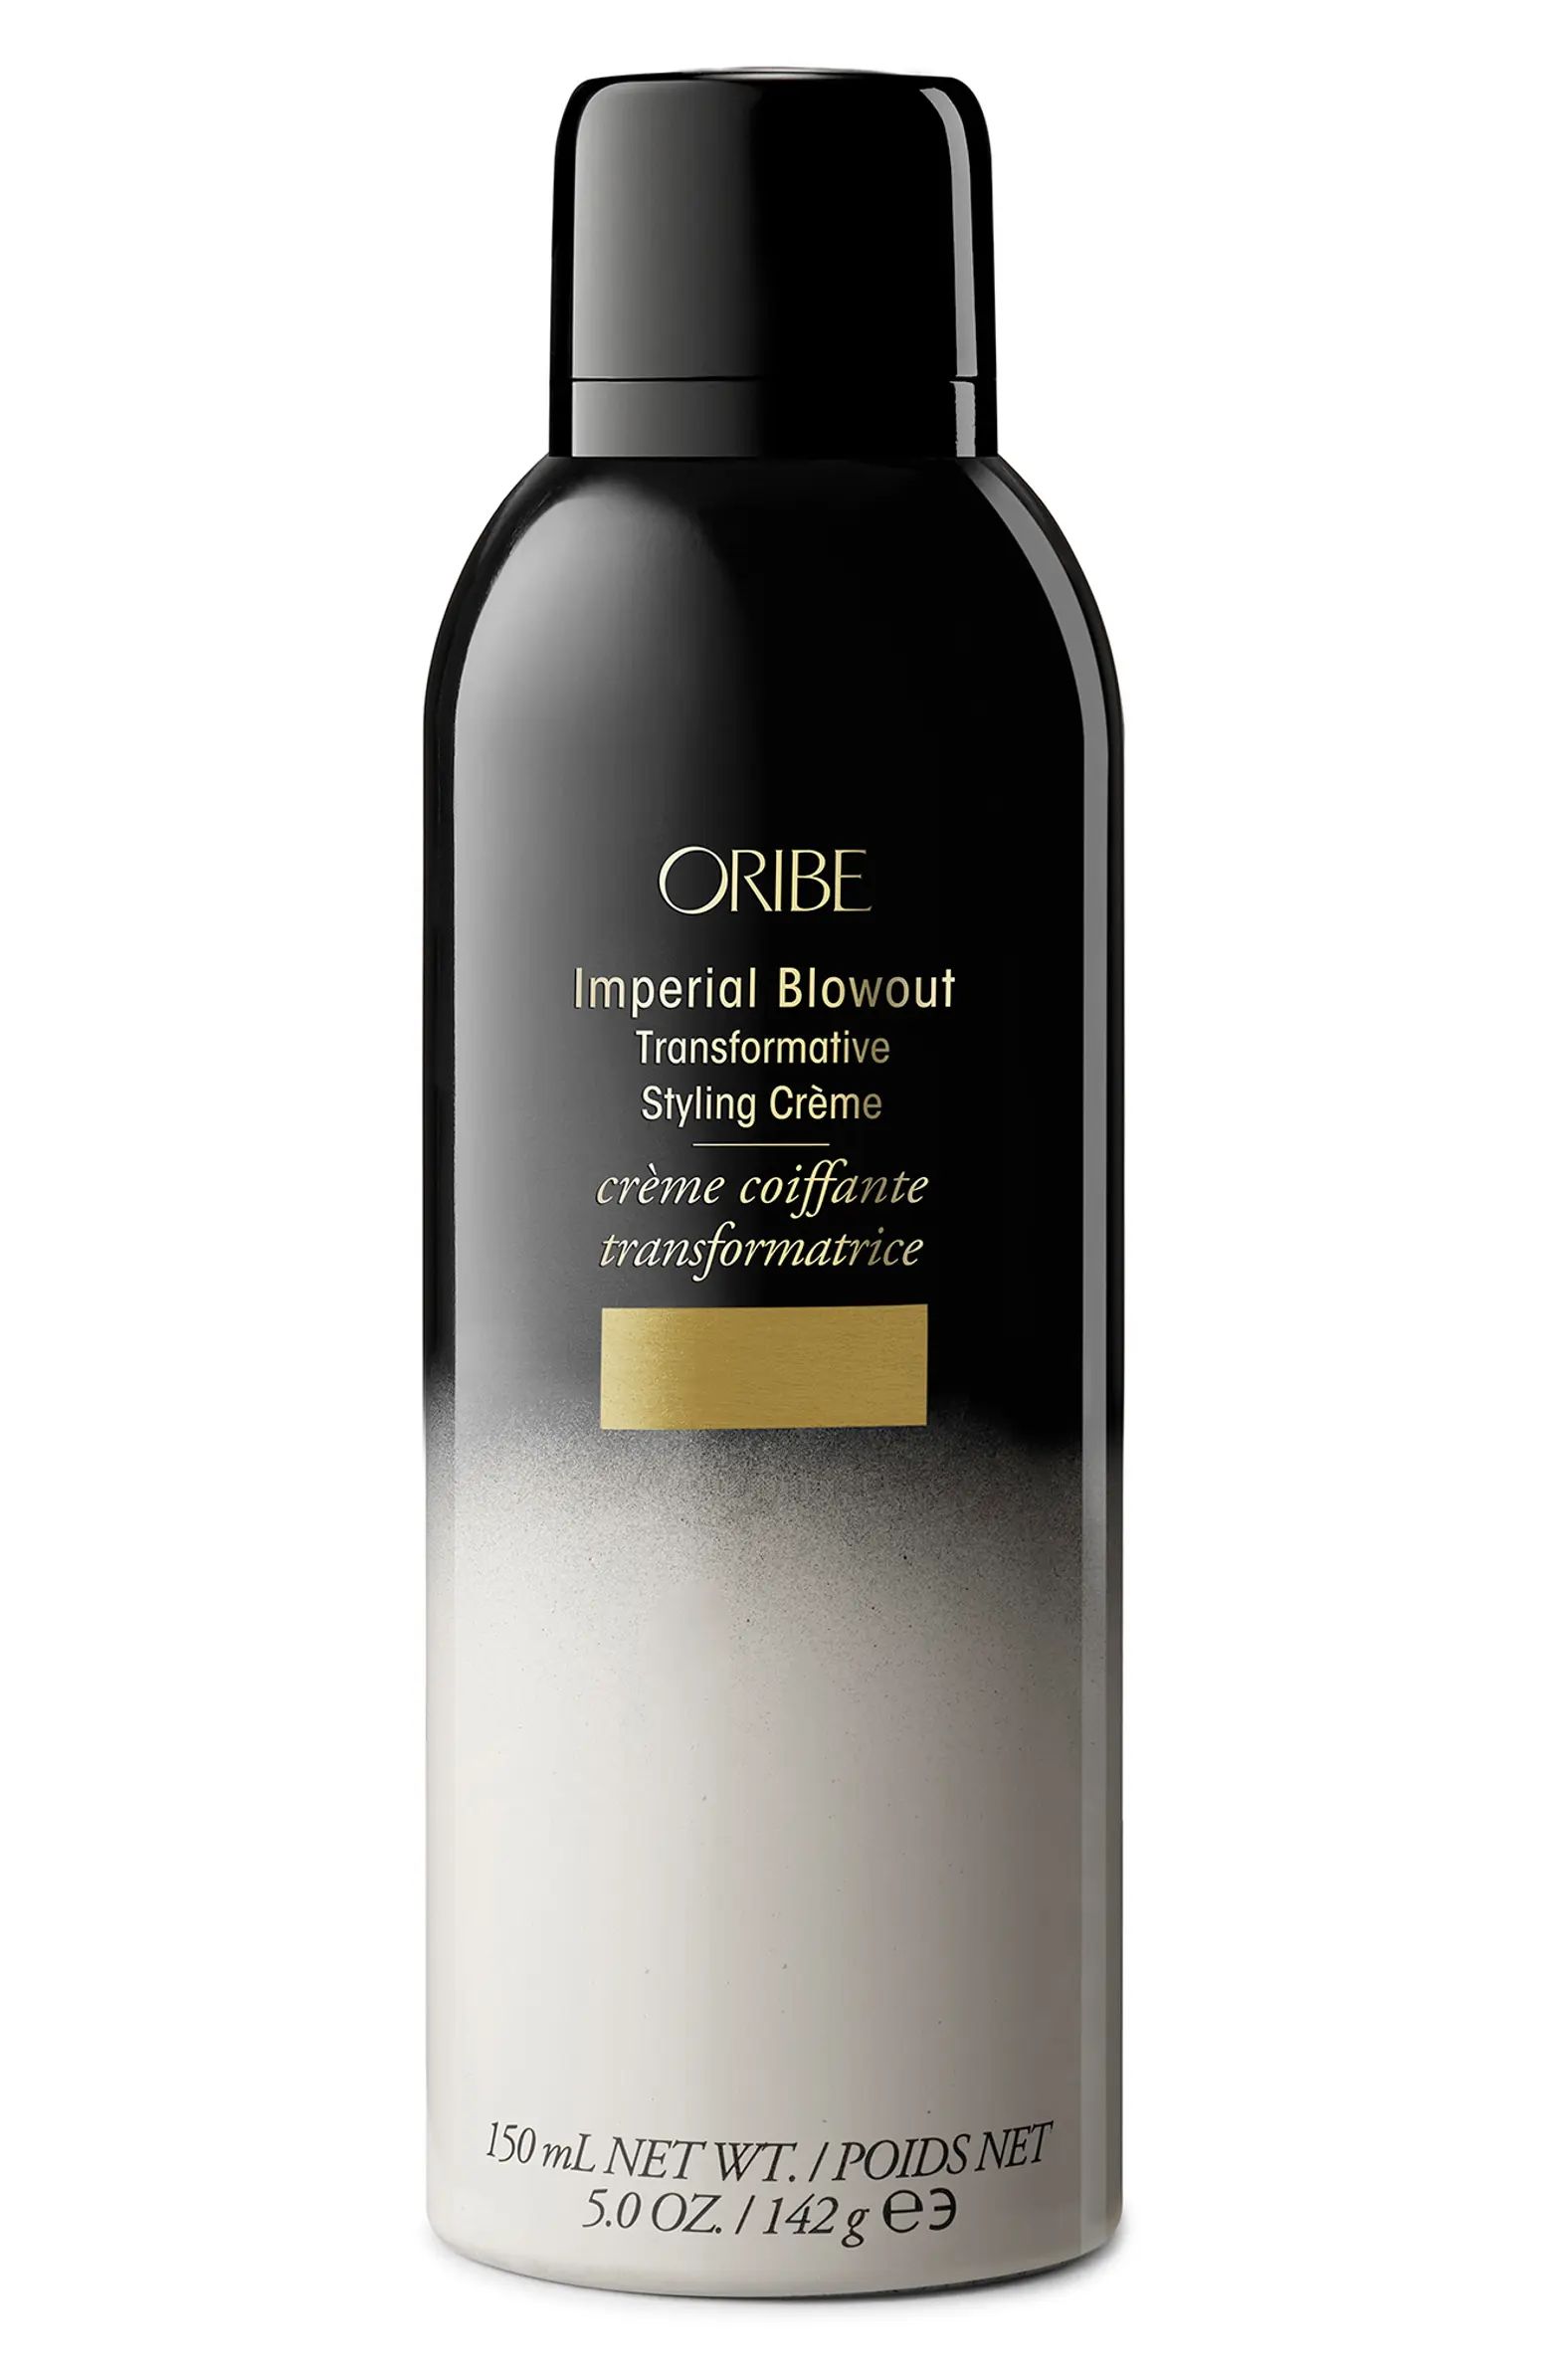 Oribe Imperial Blowout Transformative Styling Crème | Nordstrom | Nordstrom